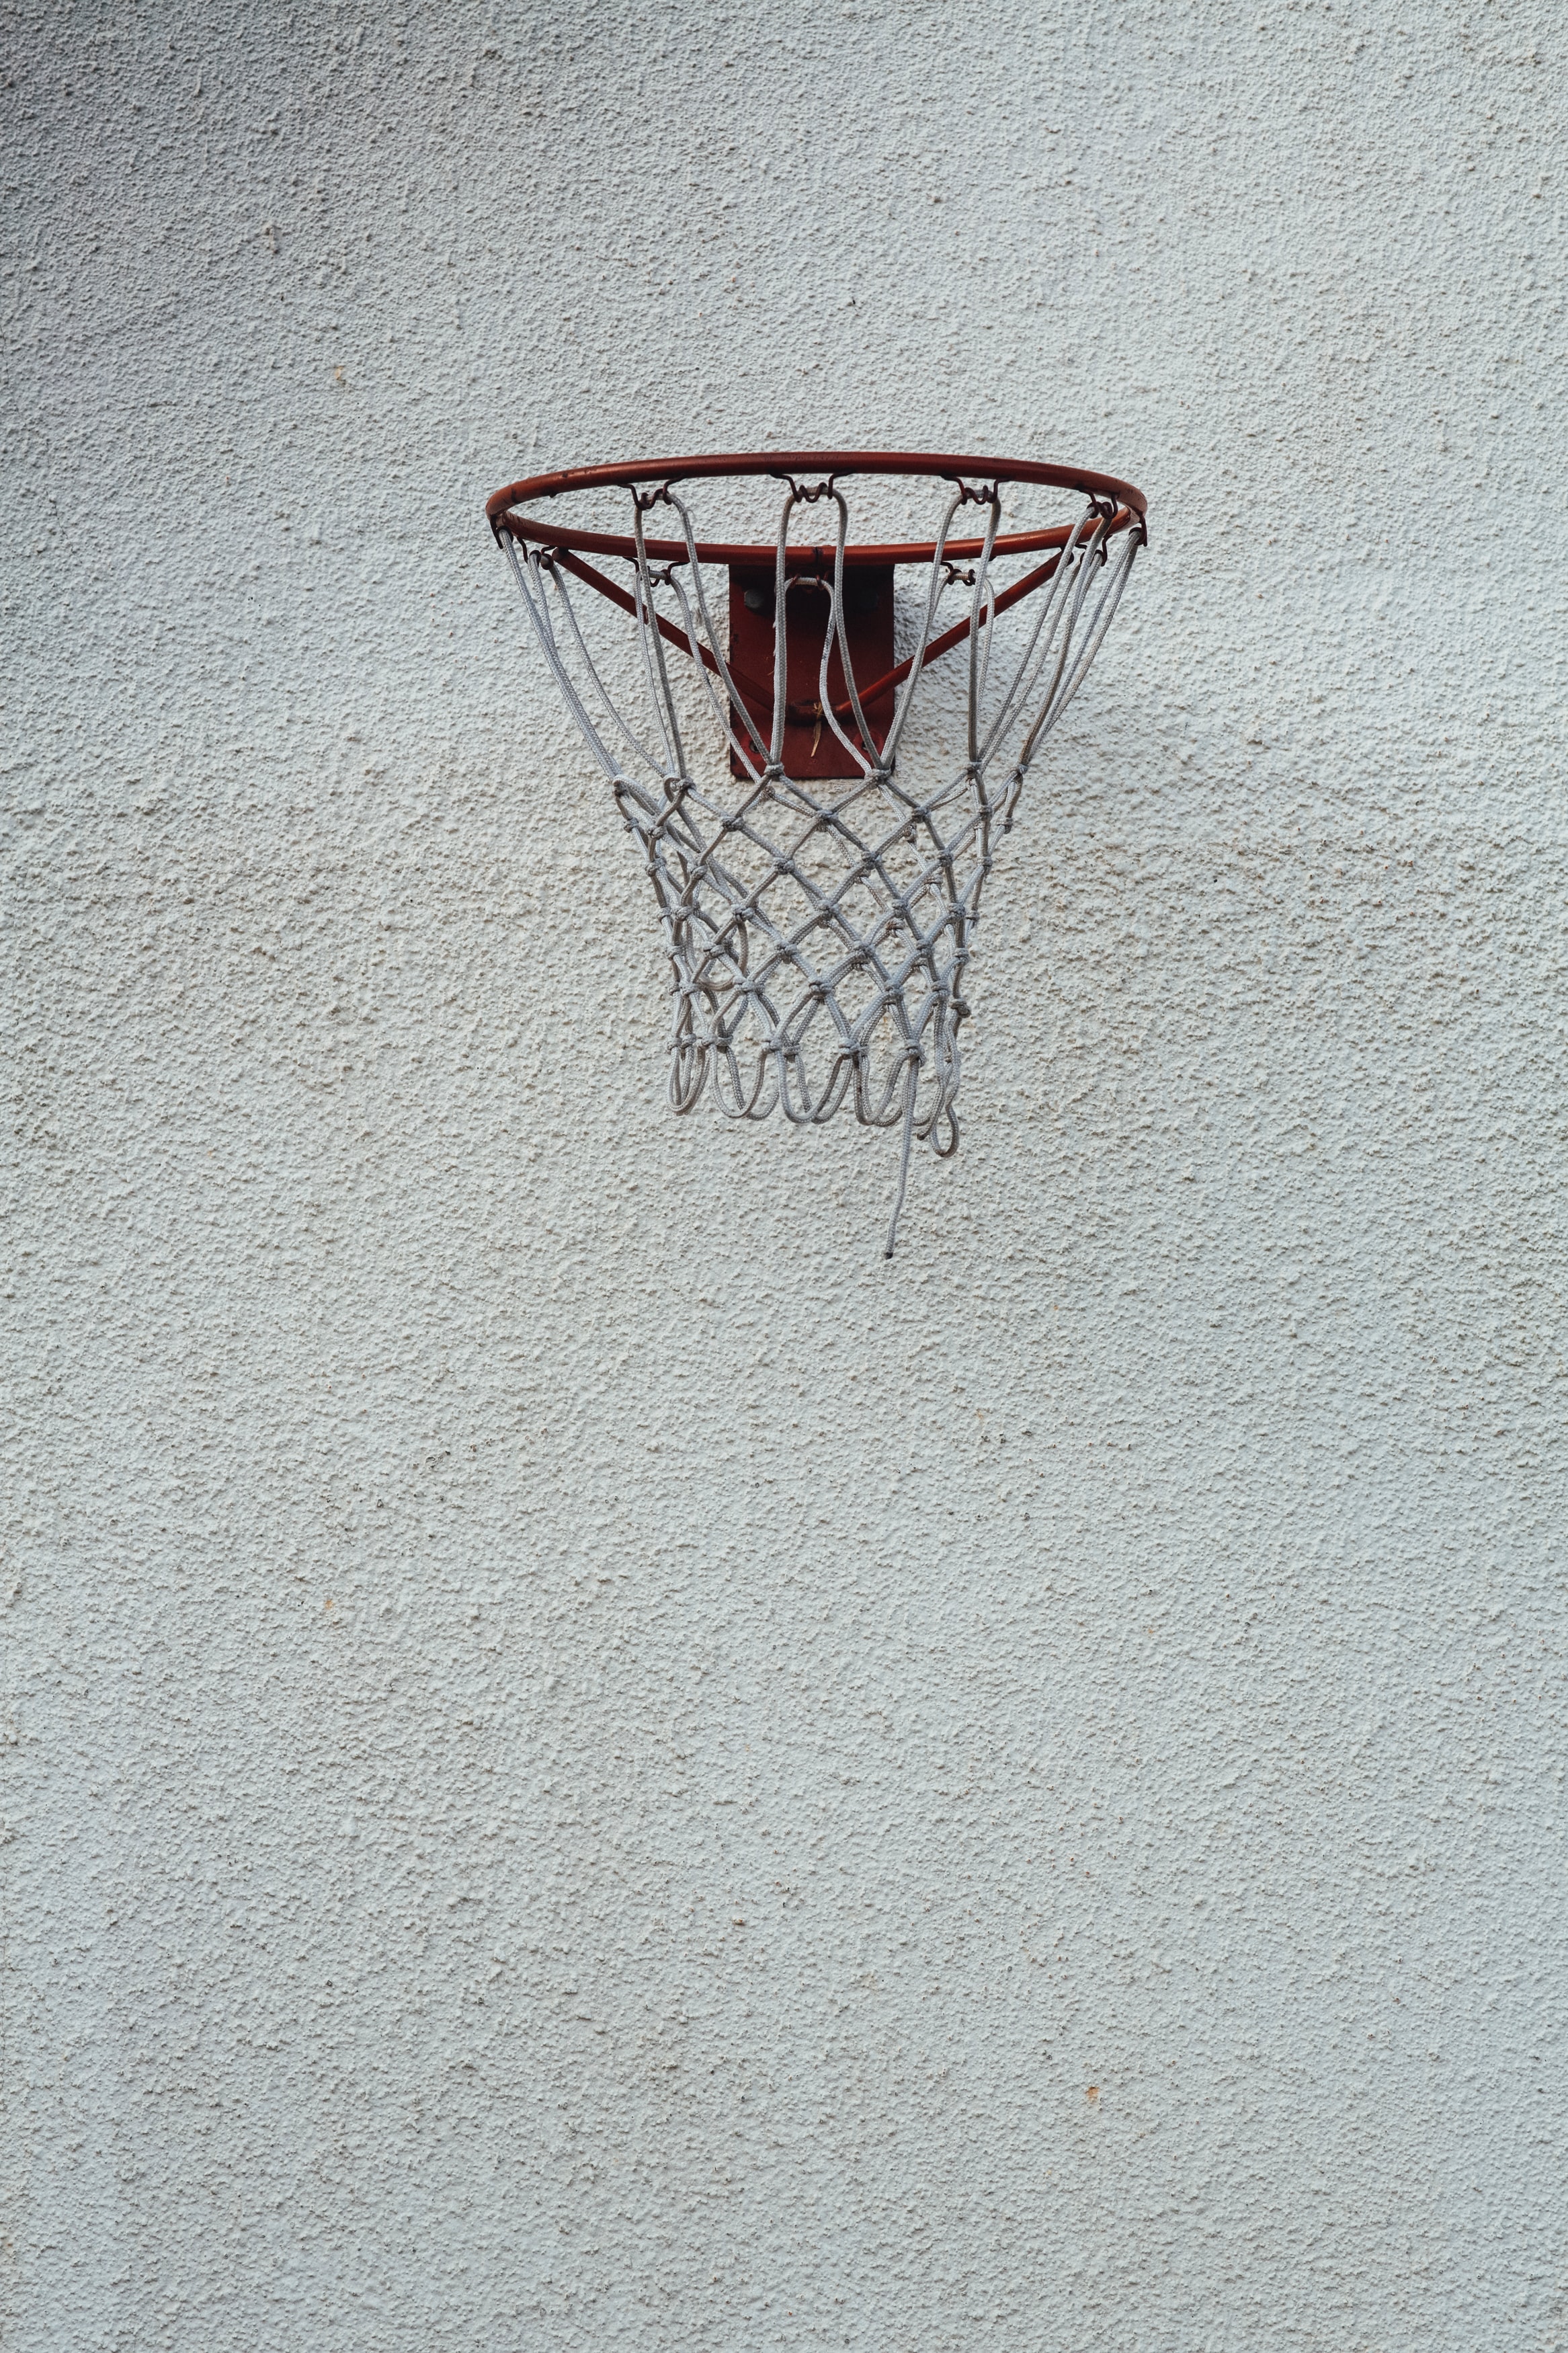 basketball, basketball hoop, basketball ring, miscellanea, miscellaneous, grid, wall cellphone